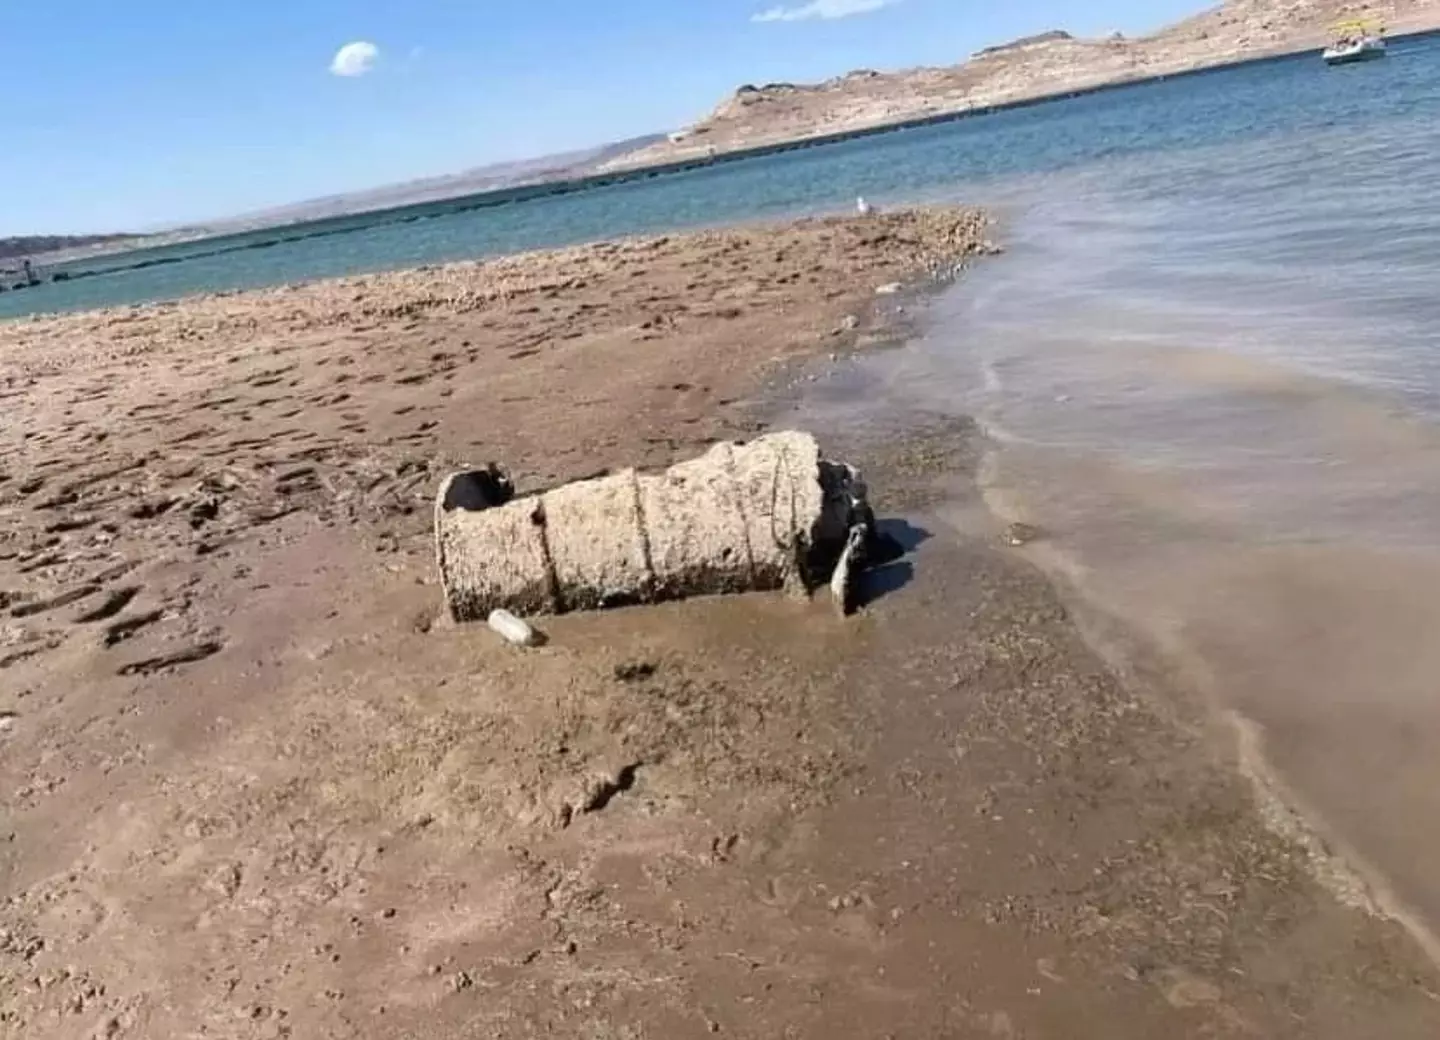 A barrel containing human remains was discovered at Lake Mead just days before.